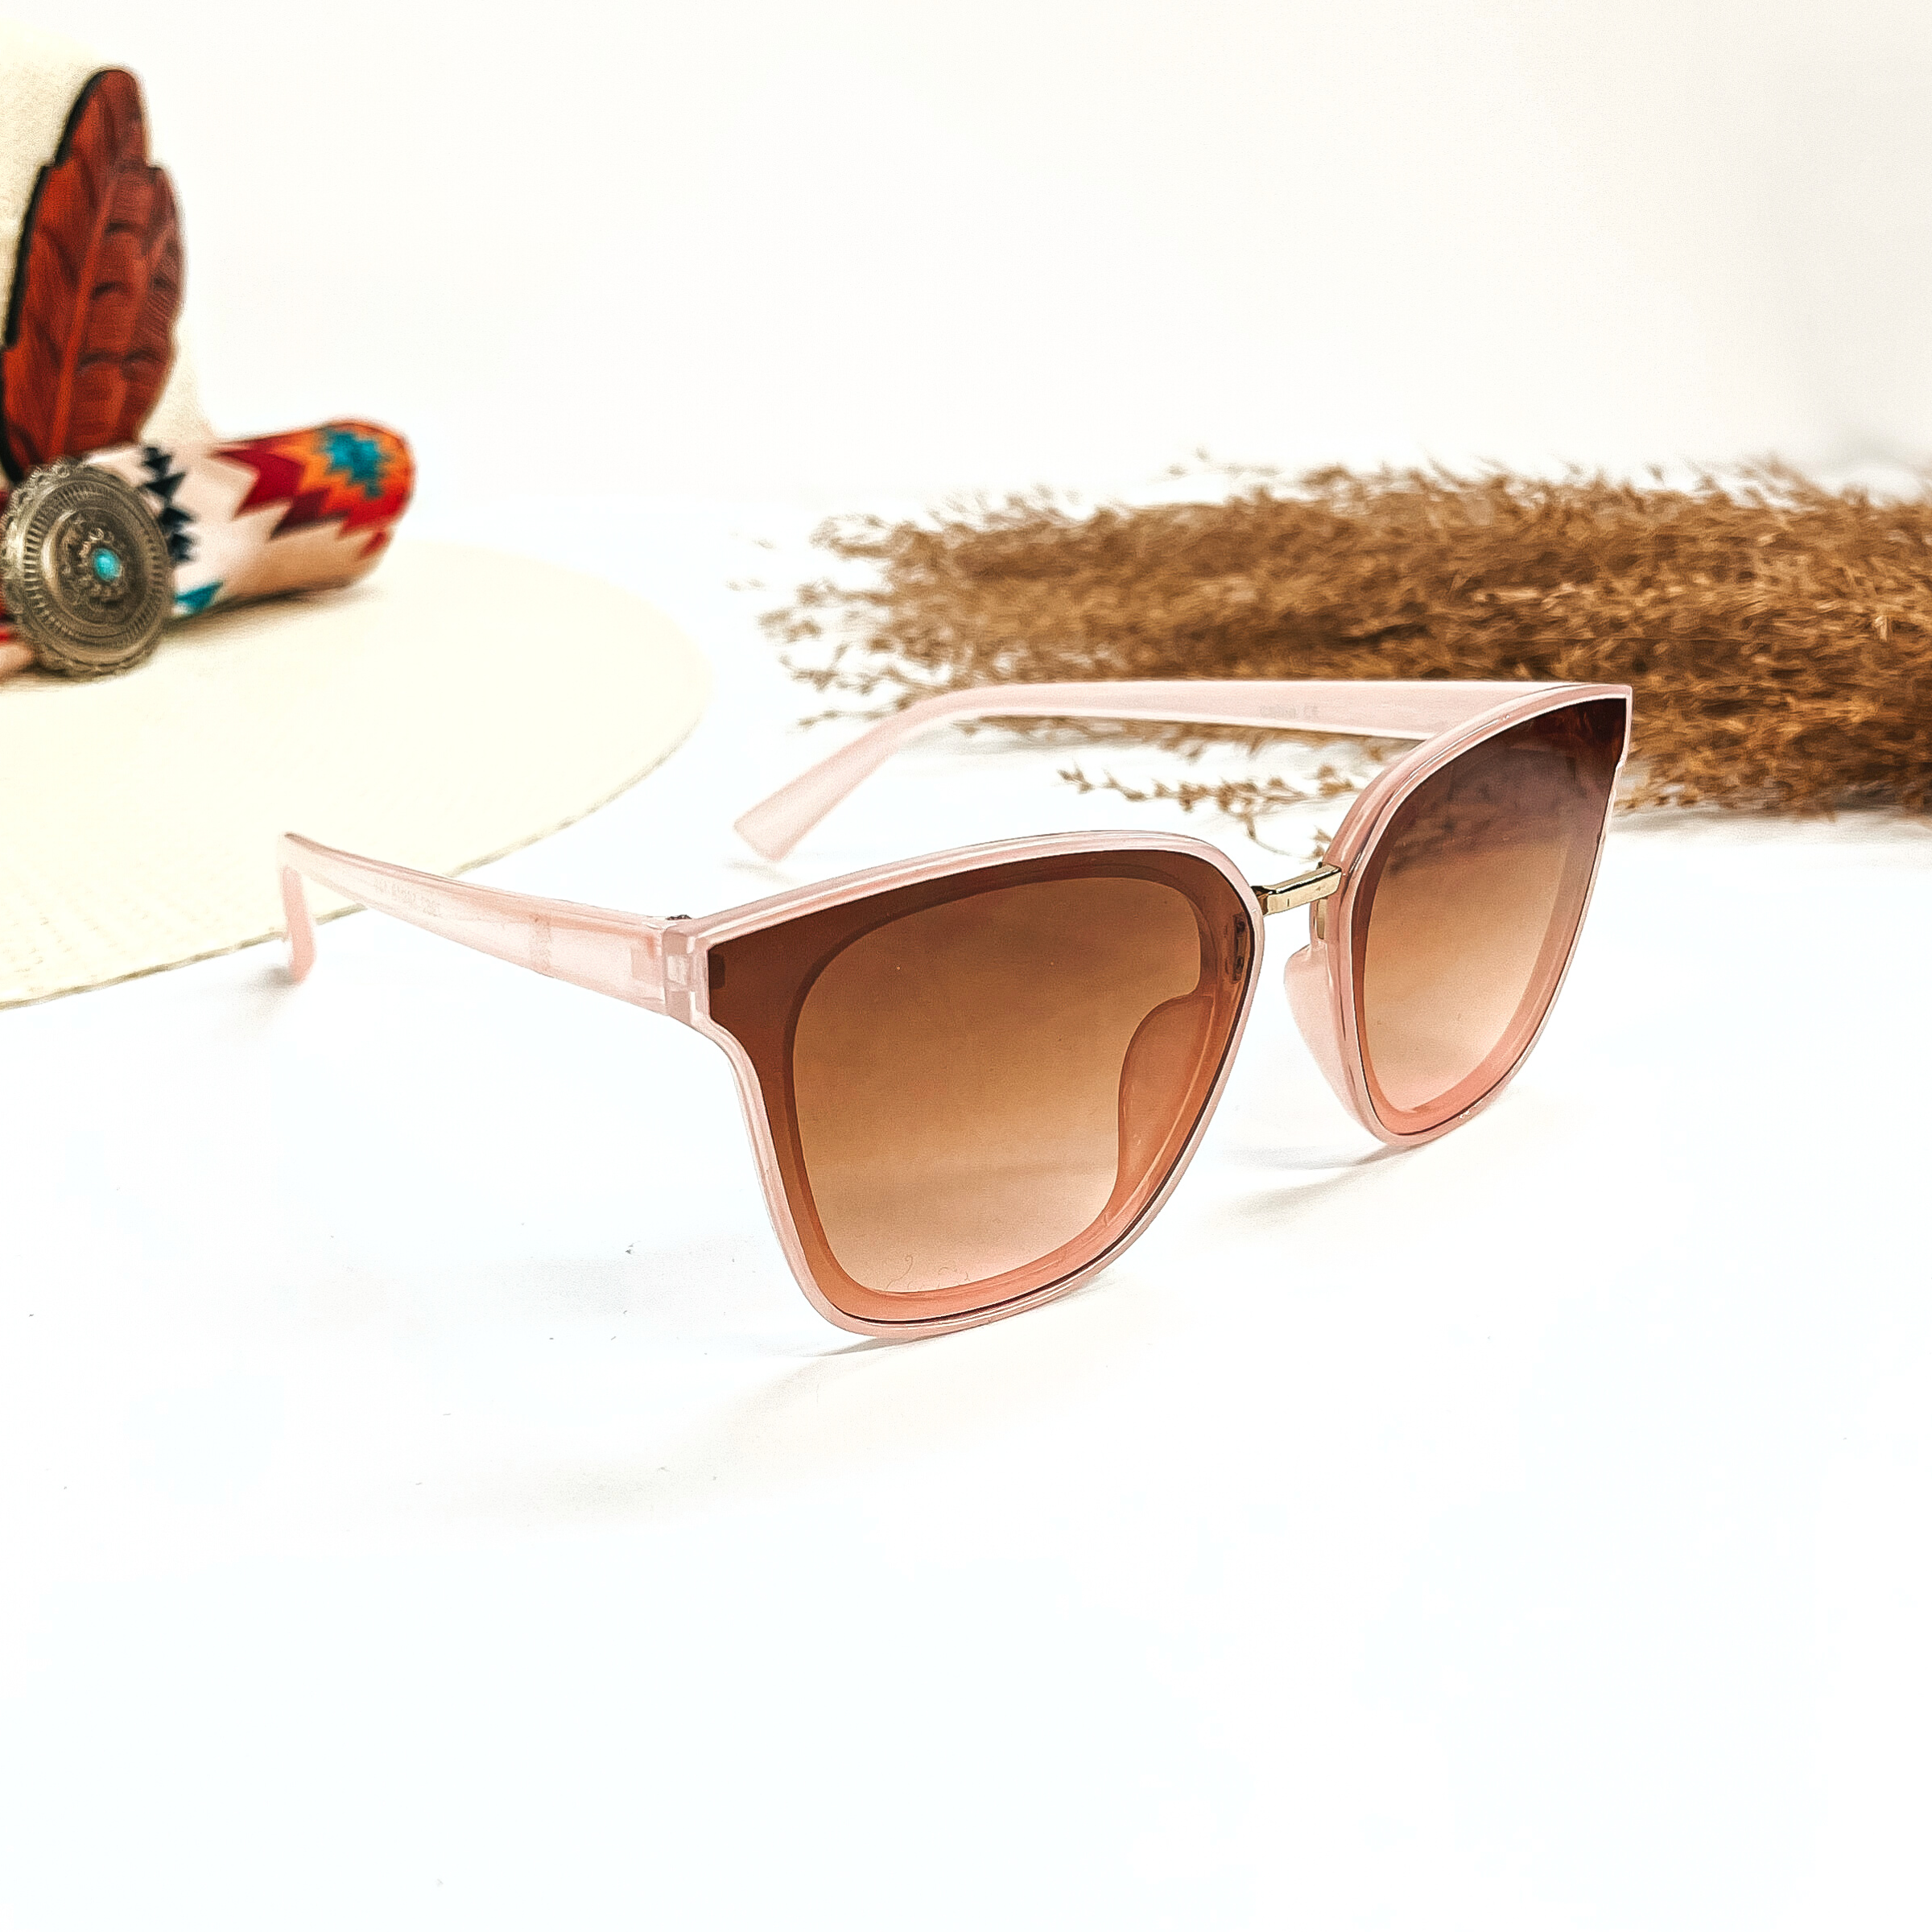 This is a pair of wayfarer style sunglasses with a transparent pink frame, brown/light  pink gradient lense with a gold tone connector. These sunglasses are taken on a white  background, there is a straw hat with a colorful aztec print hat band and a brown plant  in the side as decor.